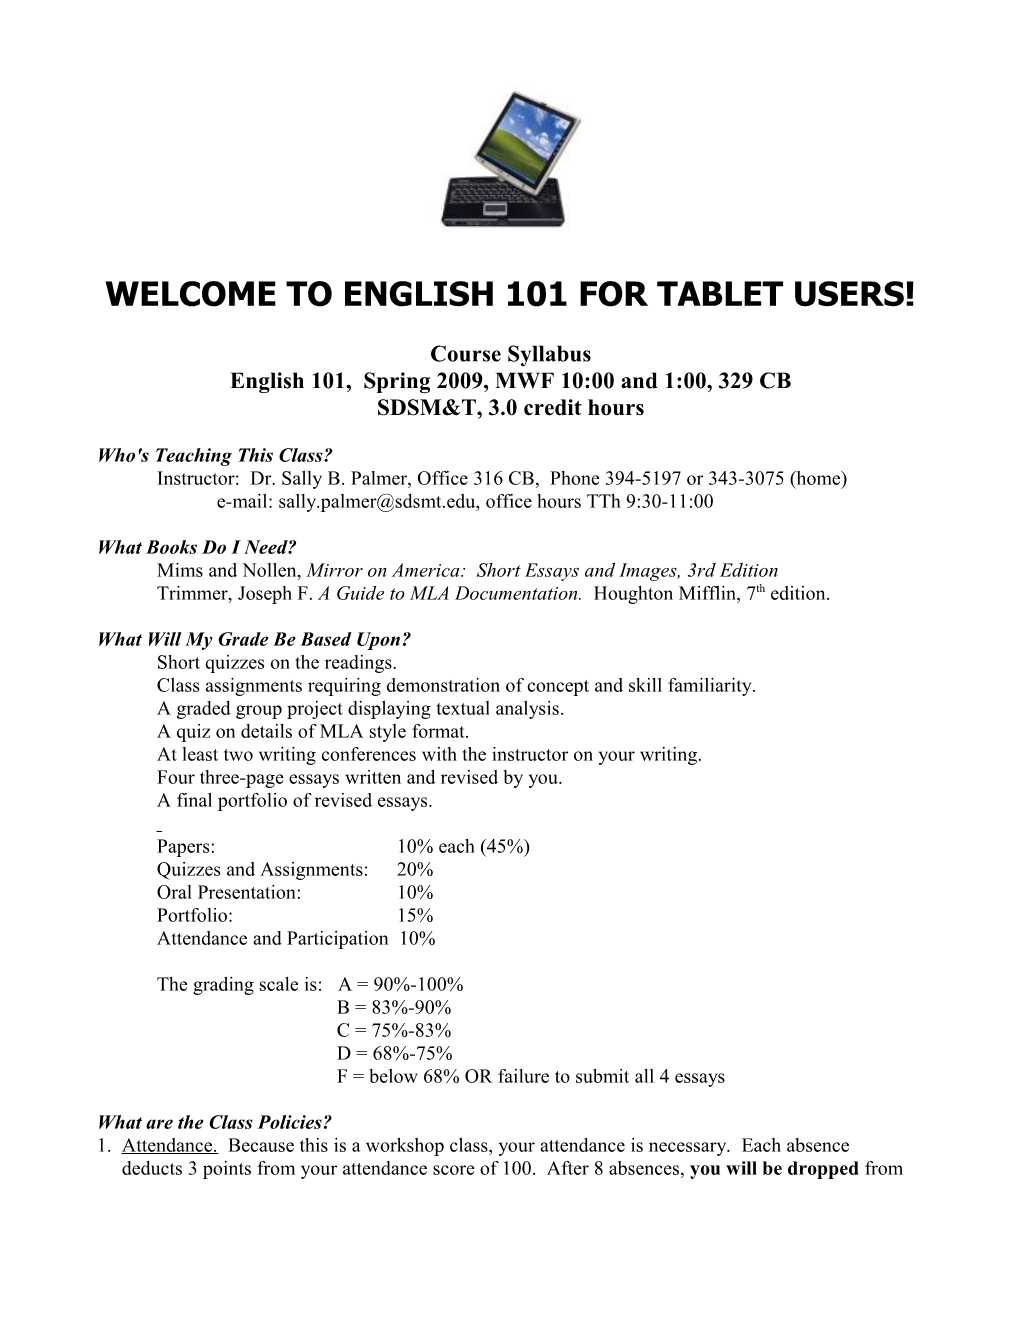 Welcome to English 101 for Tablet Users!